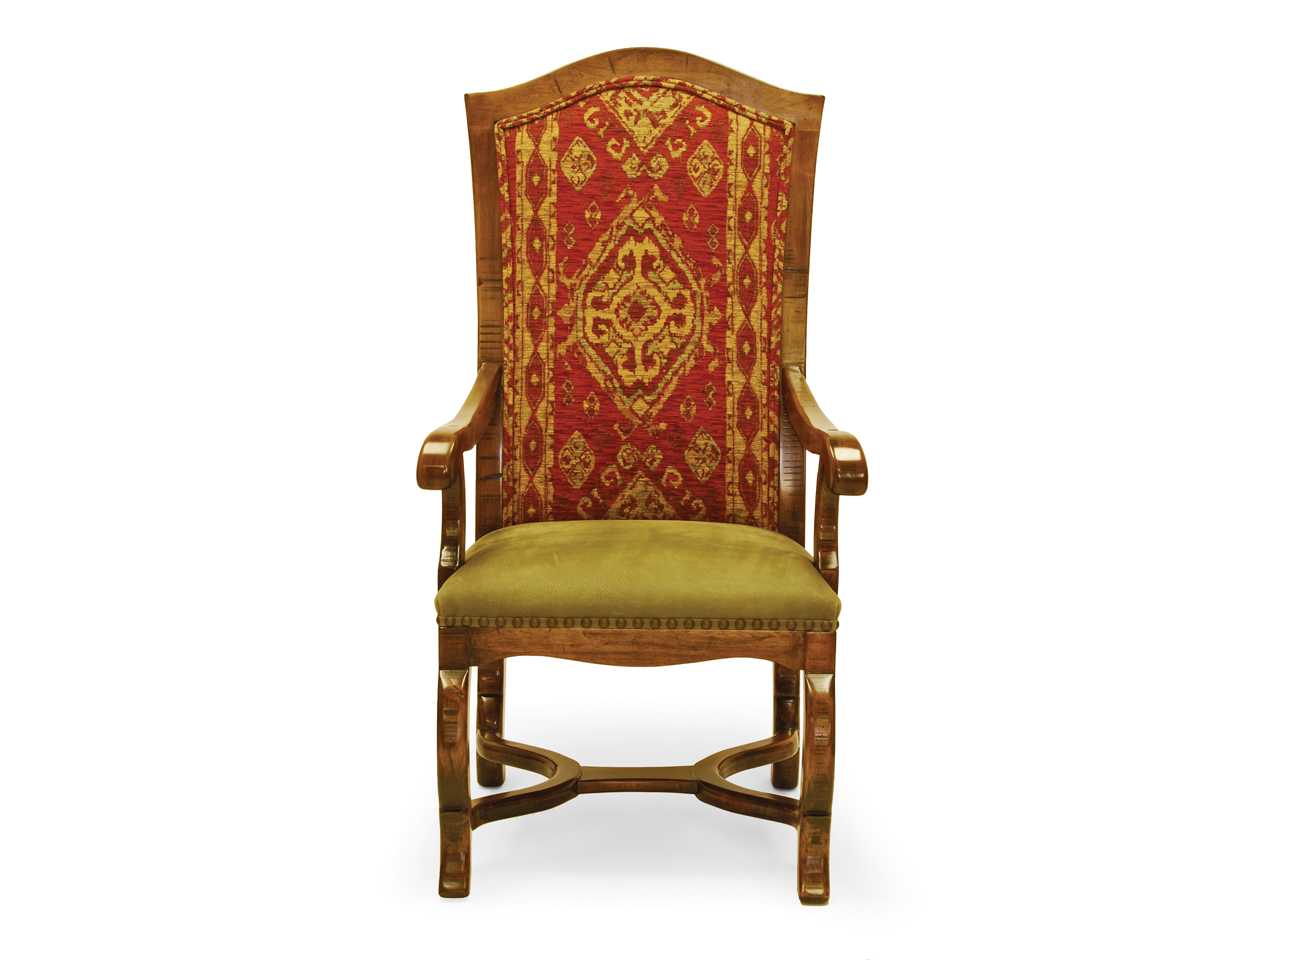 Robert-Seliger-Chateau-Chair-front